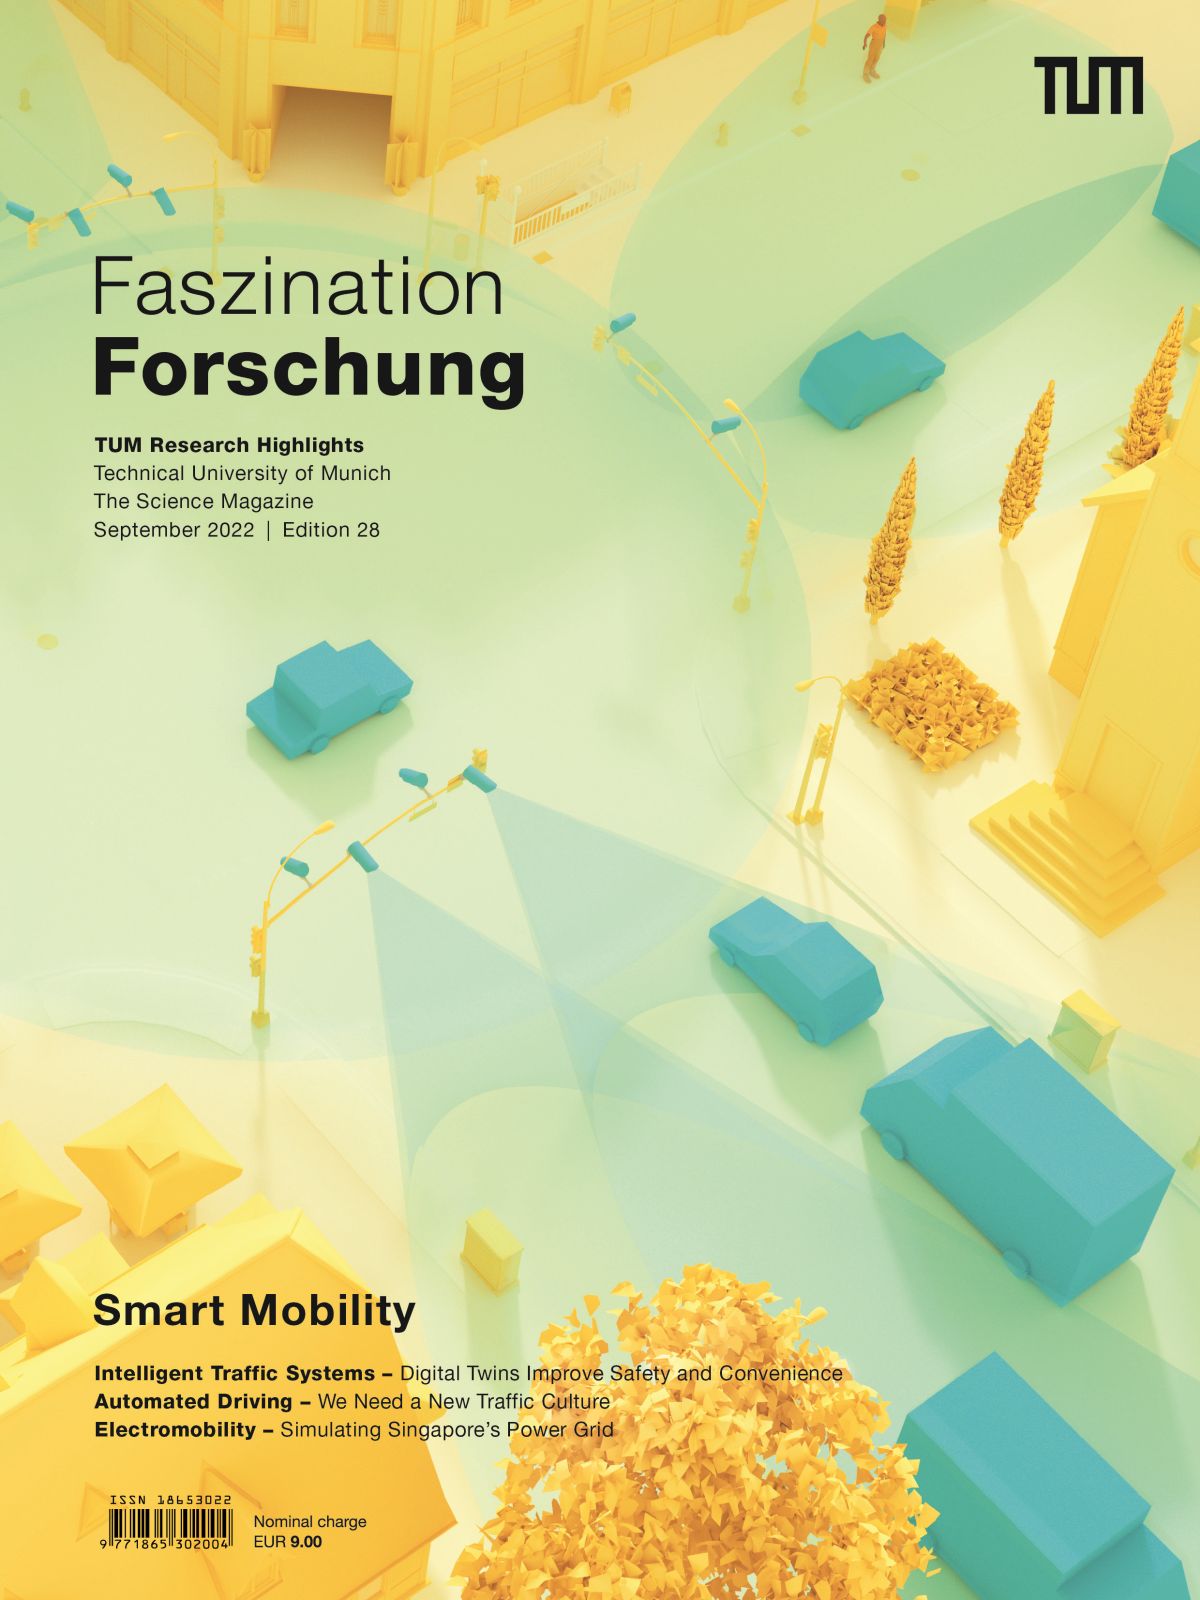 Cover page of “Faszination Forschung” magazine, edition 28